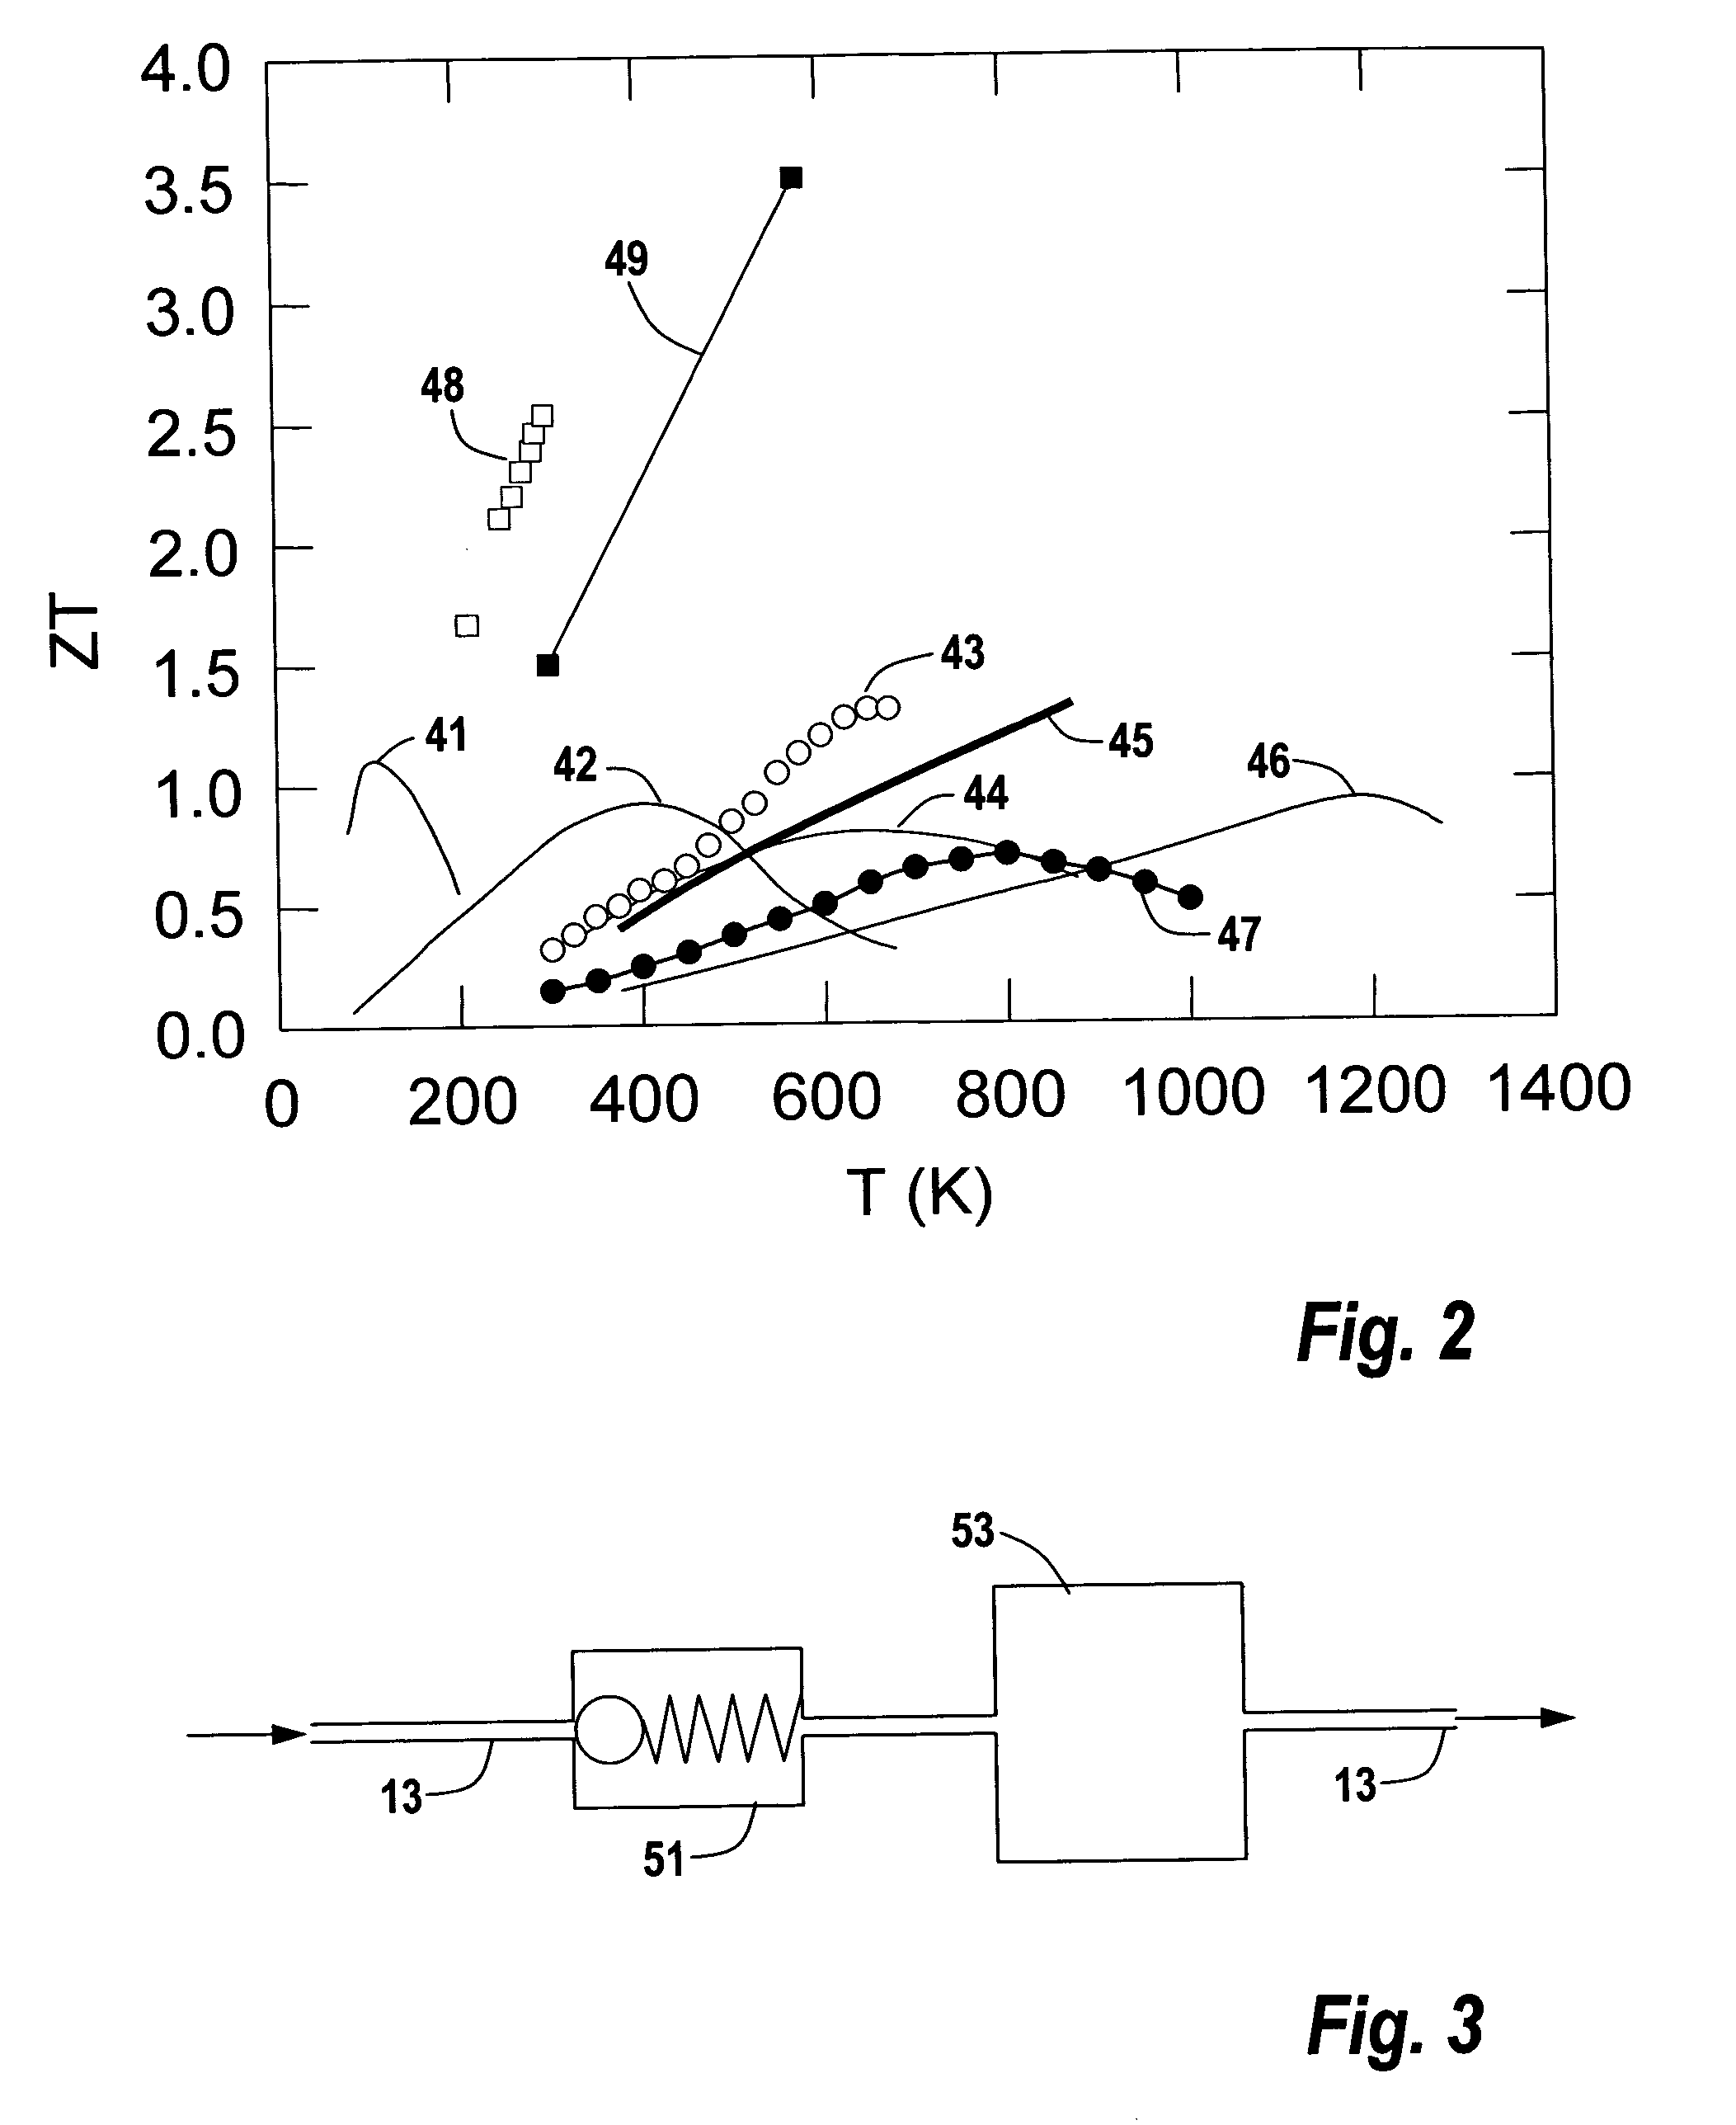 Auxiliary electrical power generation